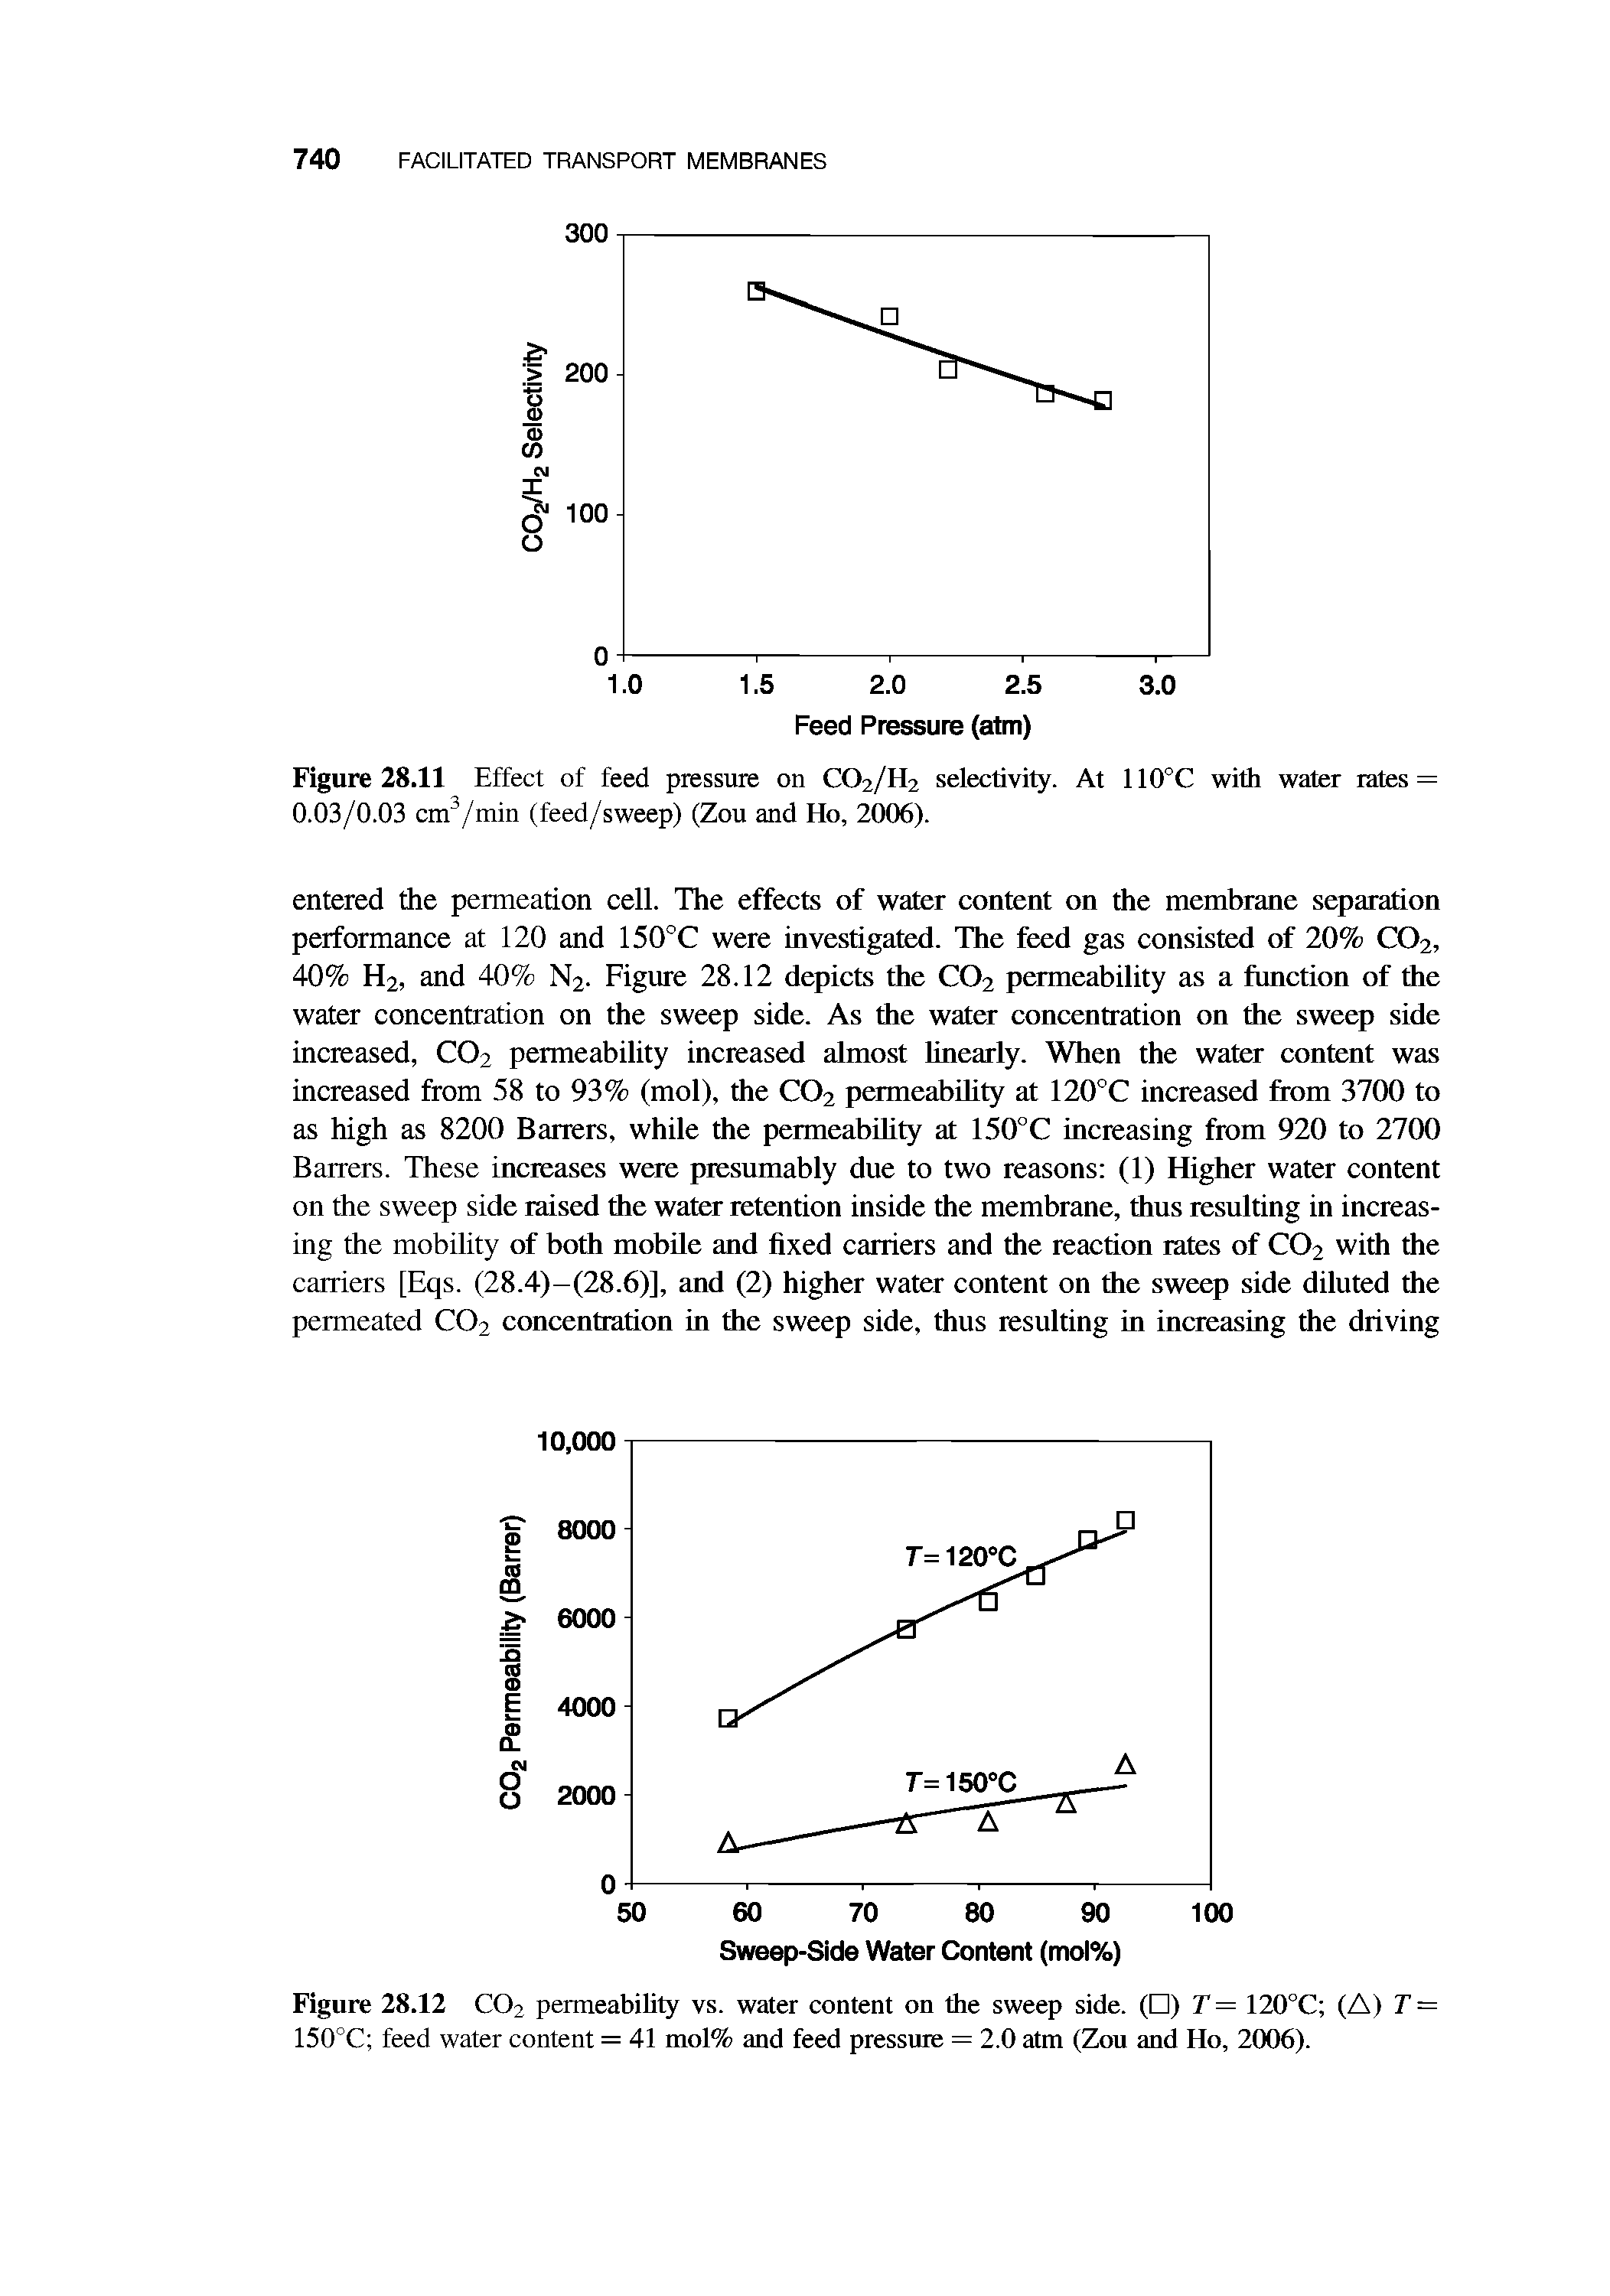 Figure 28.11 Effect of feed pressure on CO2/H2 selectivity. At 110°C with water rates = 0.03/0.03 cm /min (feed/sweep) (Zou and Ho, 2006).